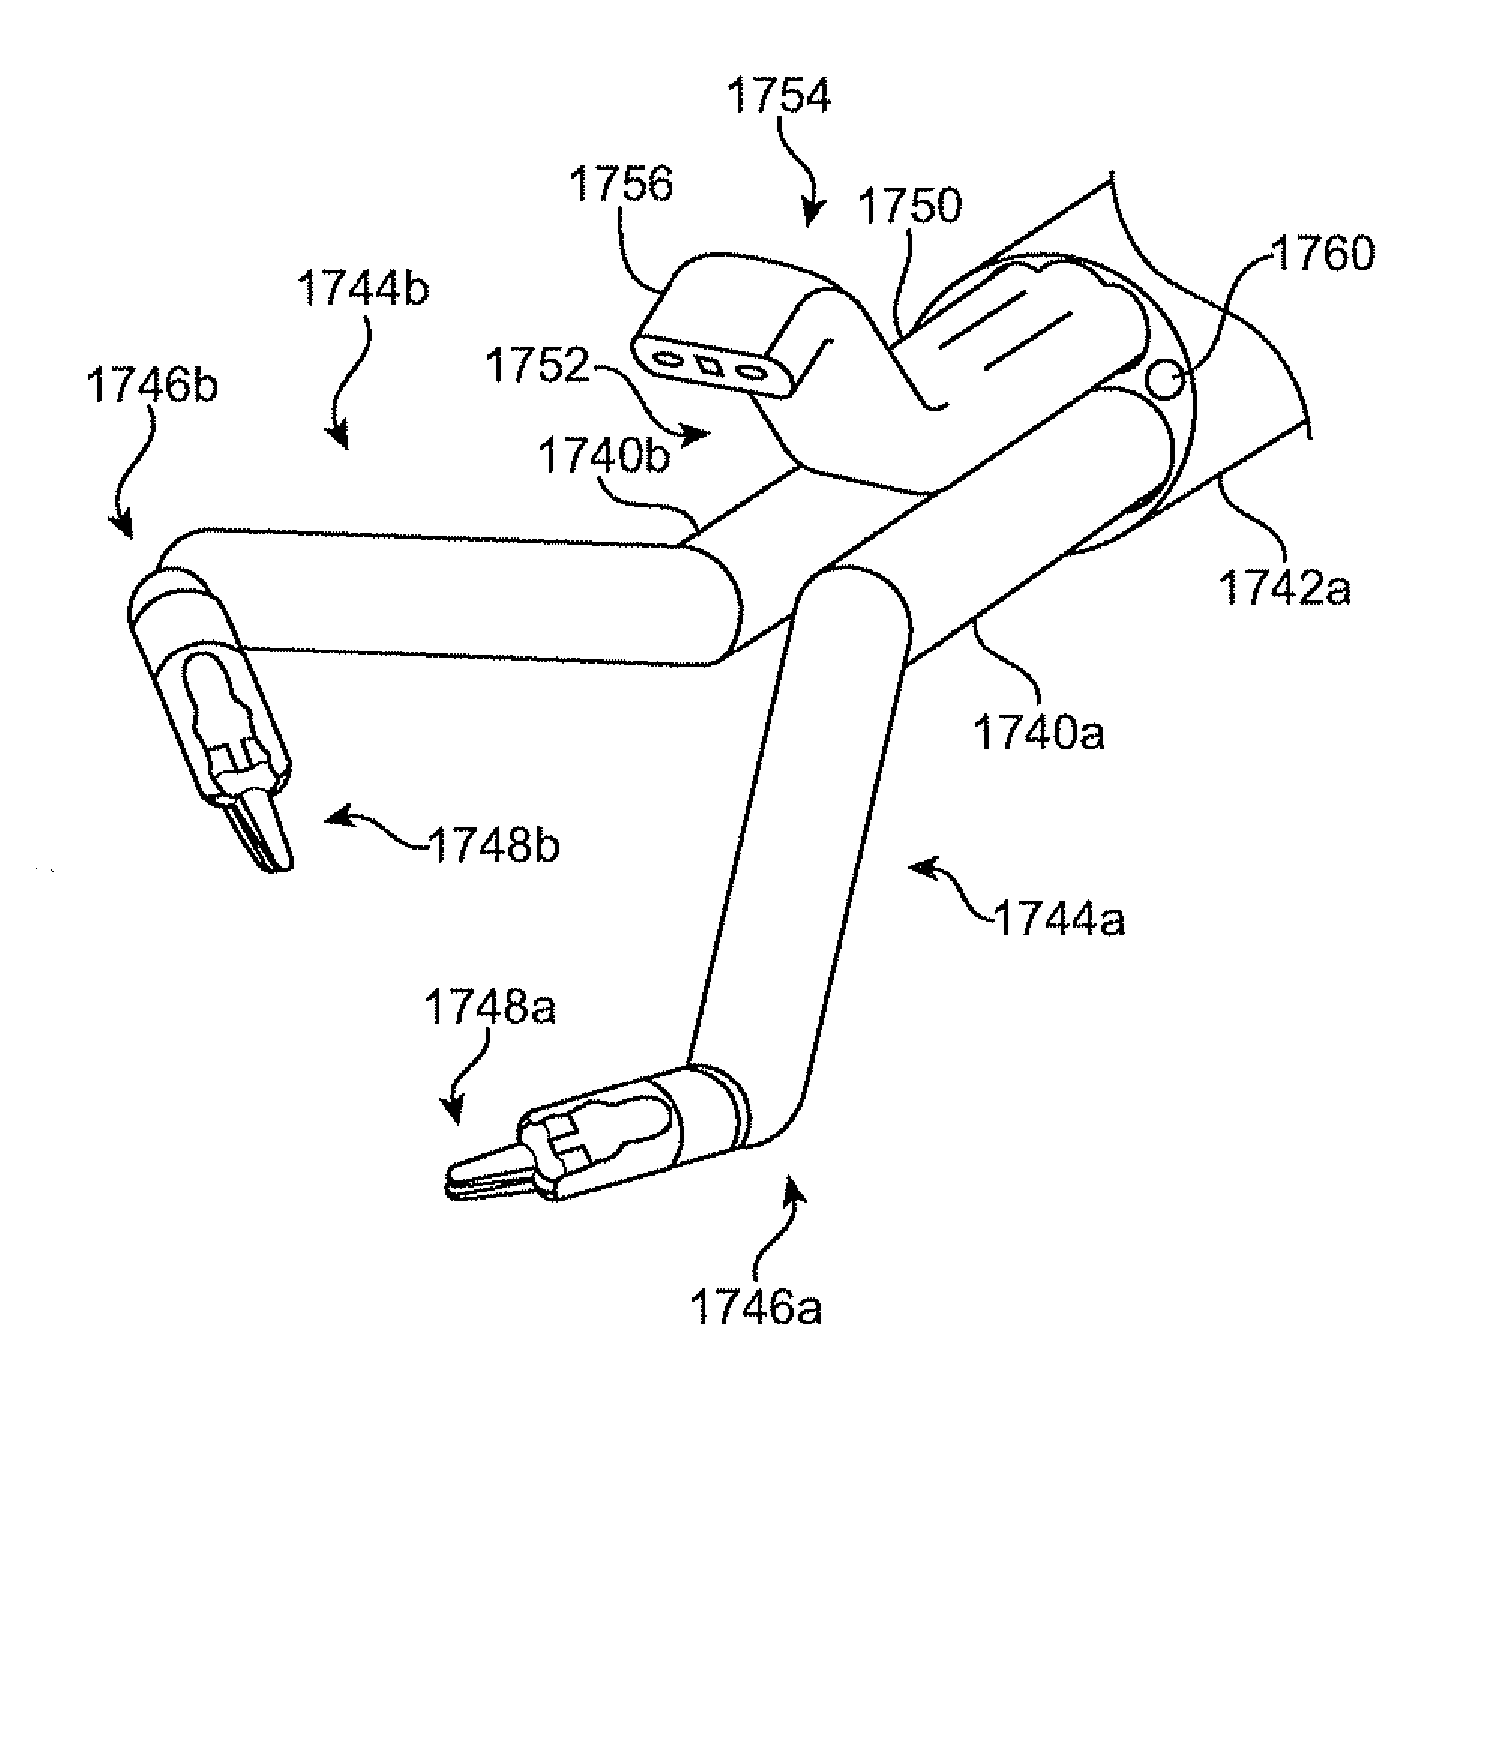 Minimally invasive surgical system